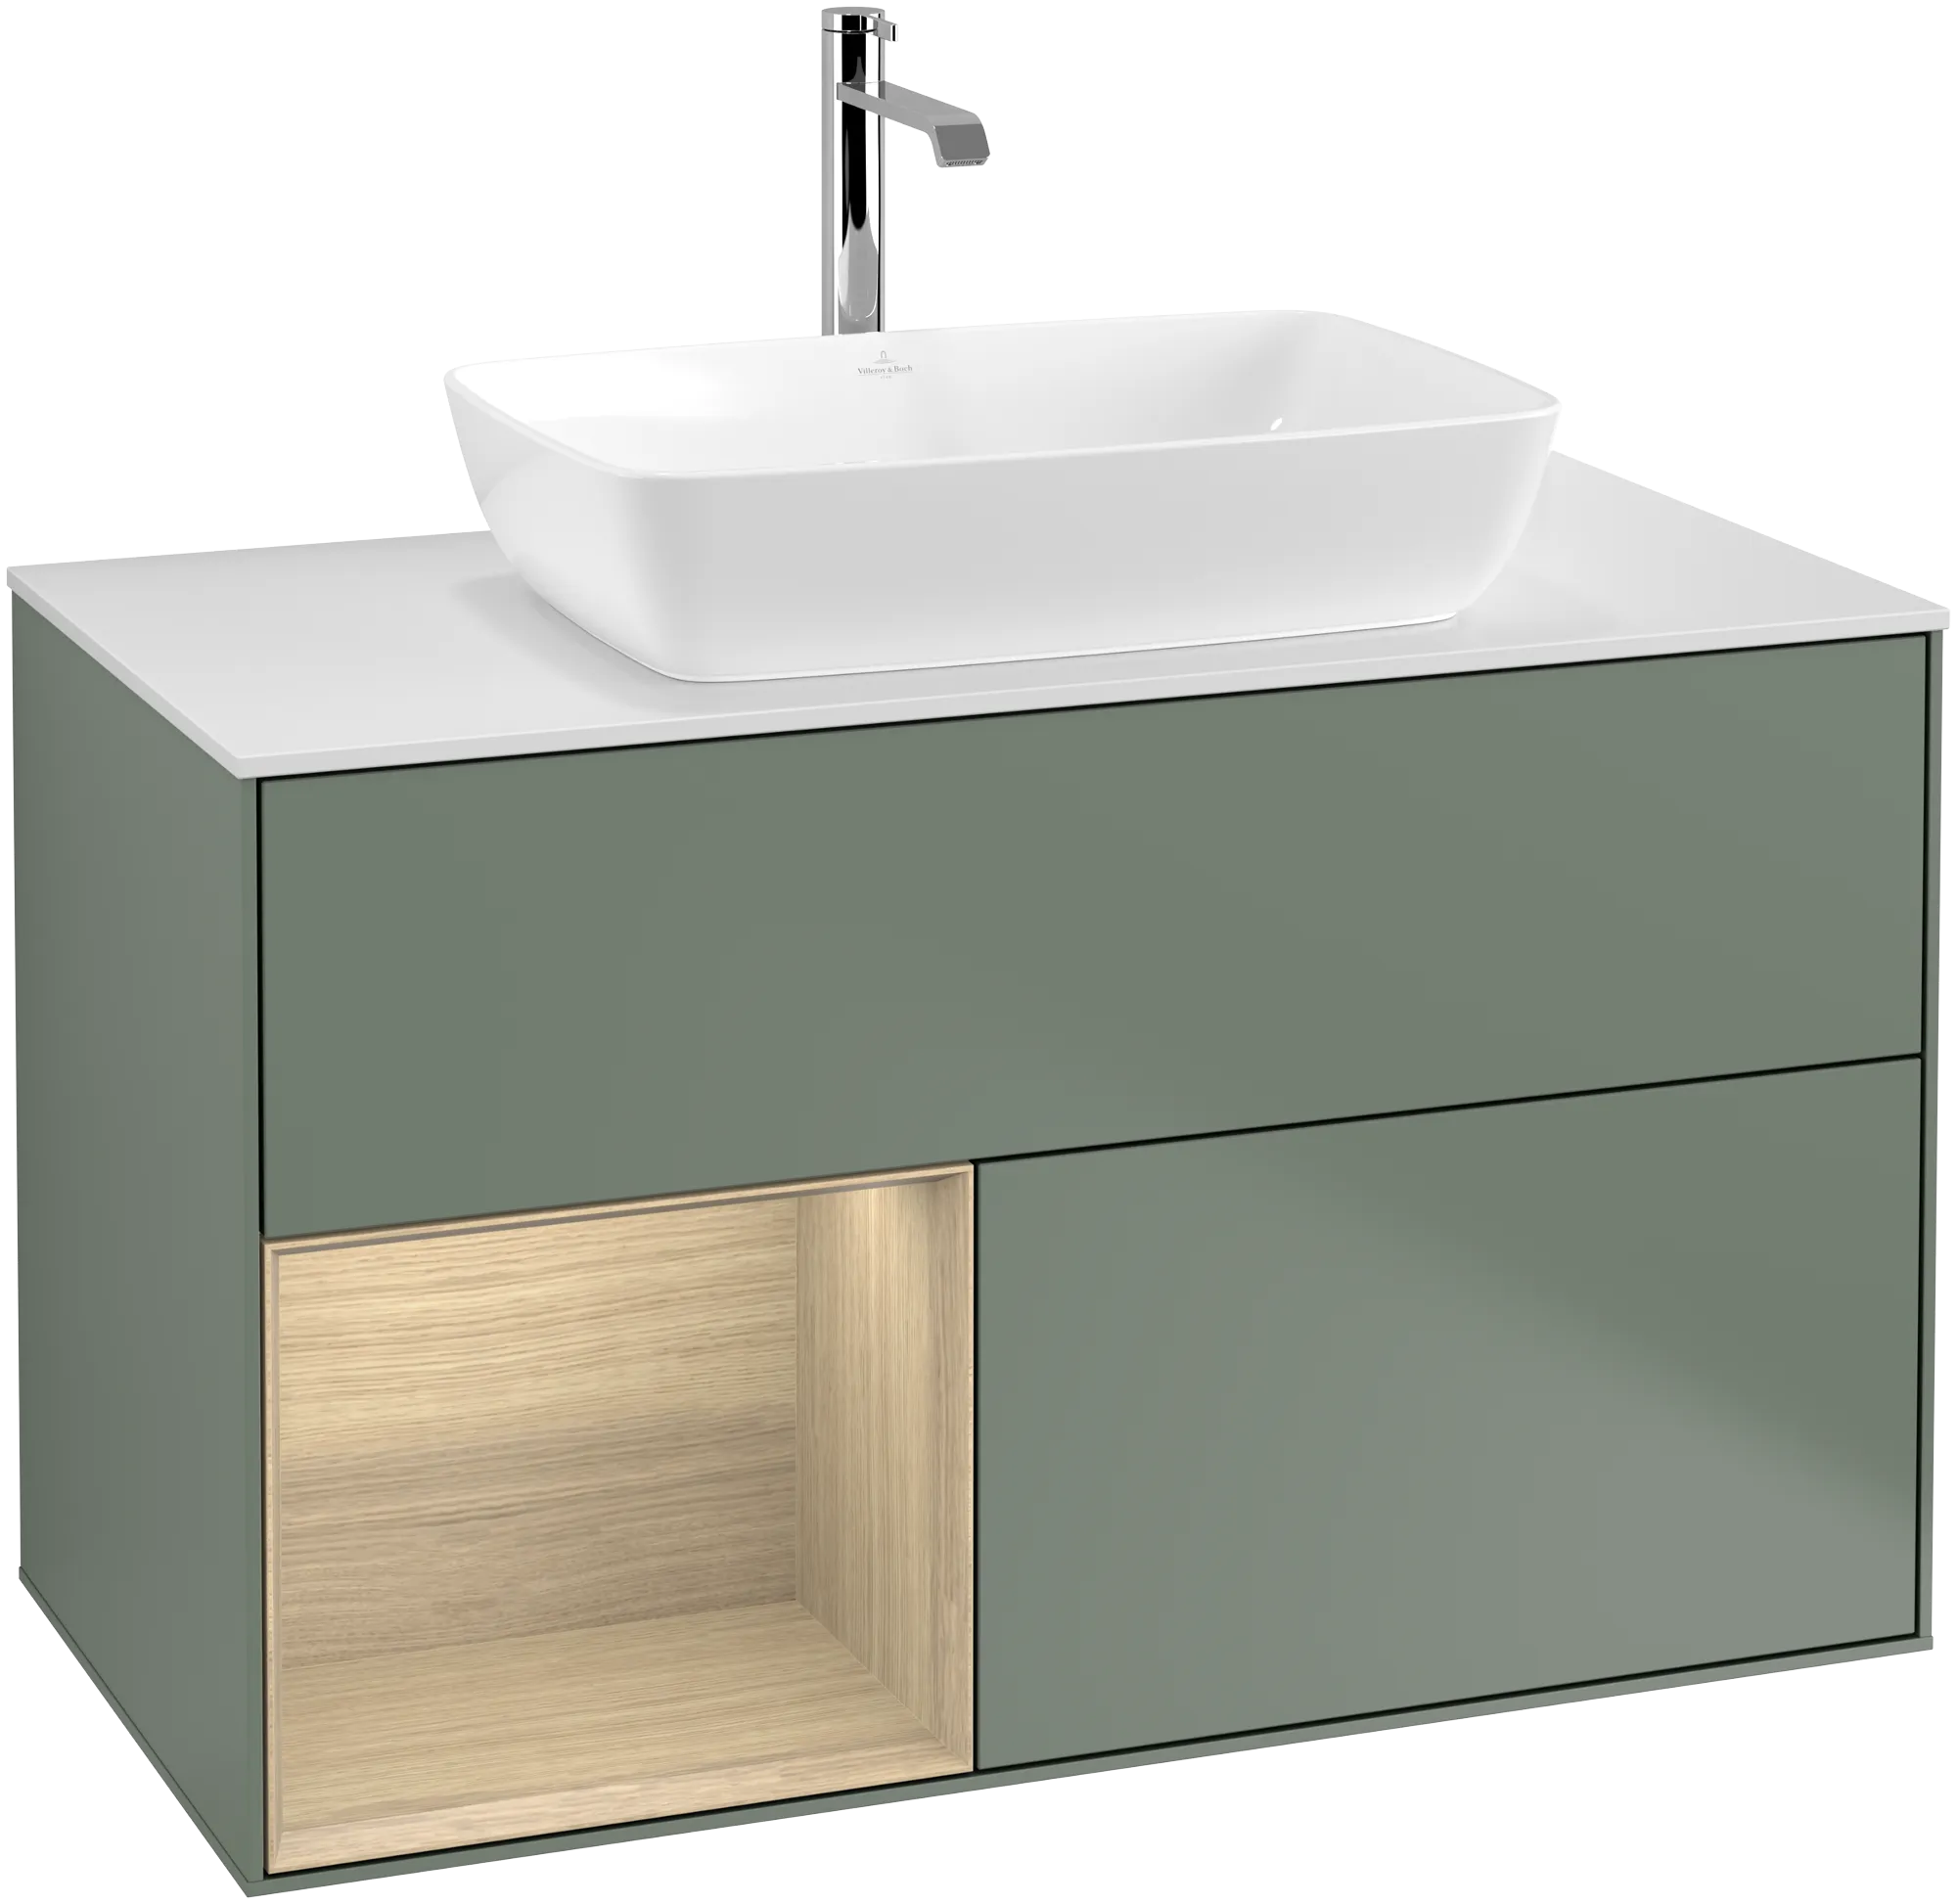 Picture of VILLEROY BOCH Finion Vanity unit, with lighting, 2 pull-out compartments, 1000 x 603 x 501 mm, Olive Matt Lacquer / Oak Veneer / Glass White Matt #G771PCGM